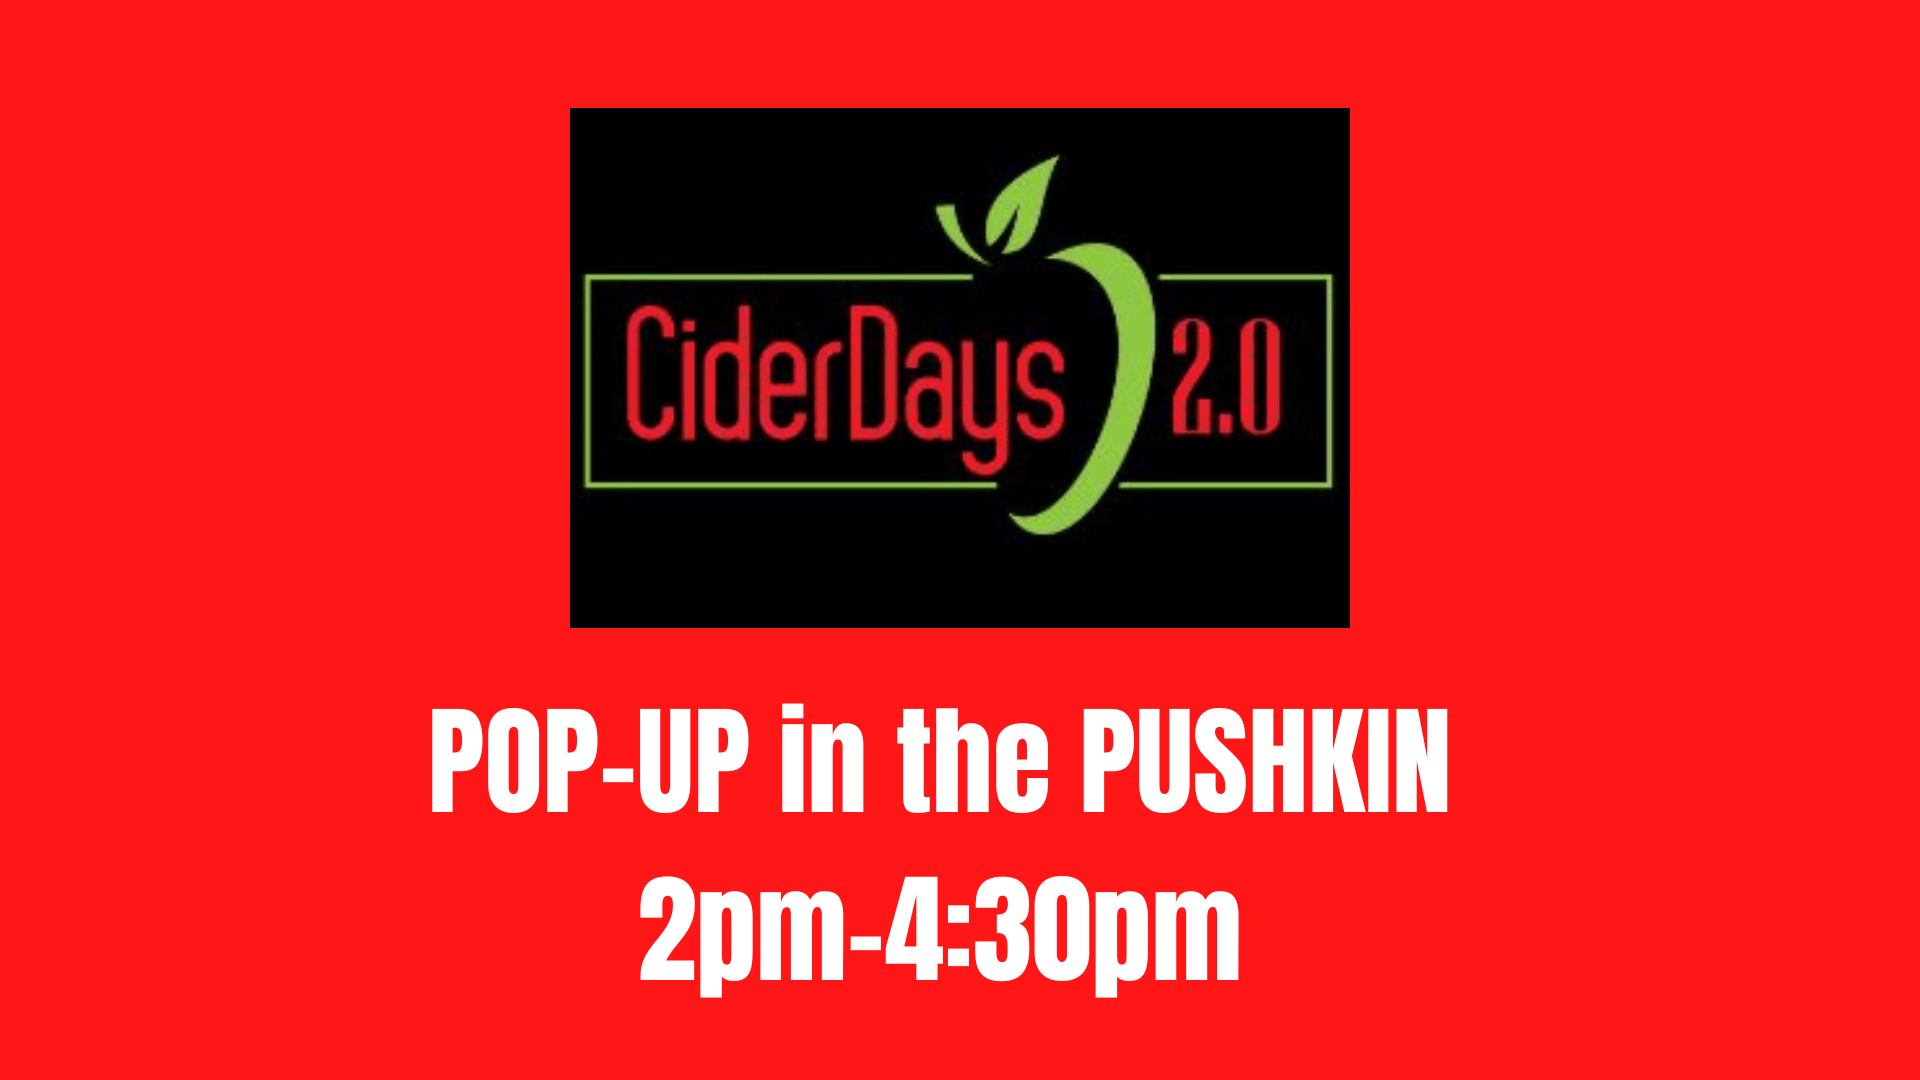 Cider Days 2.0 Pop-Up in the Pushkin – FREE